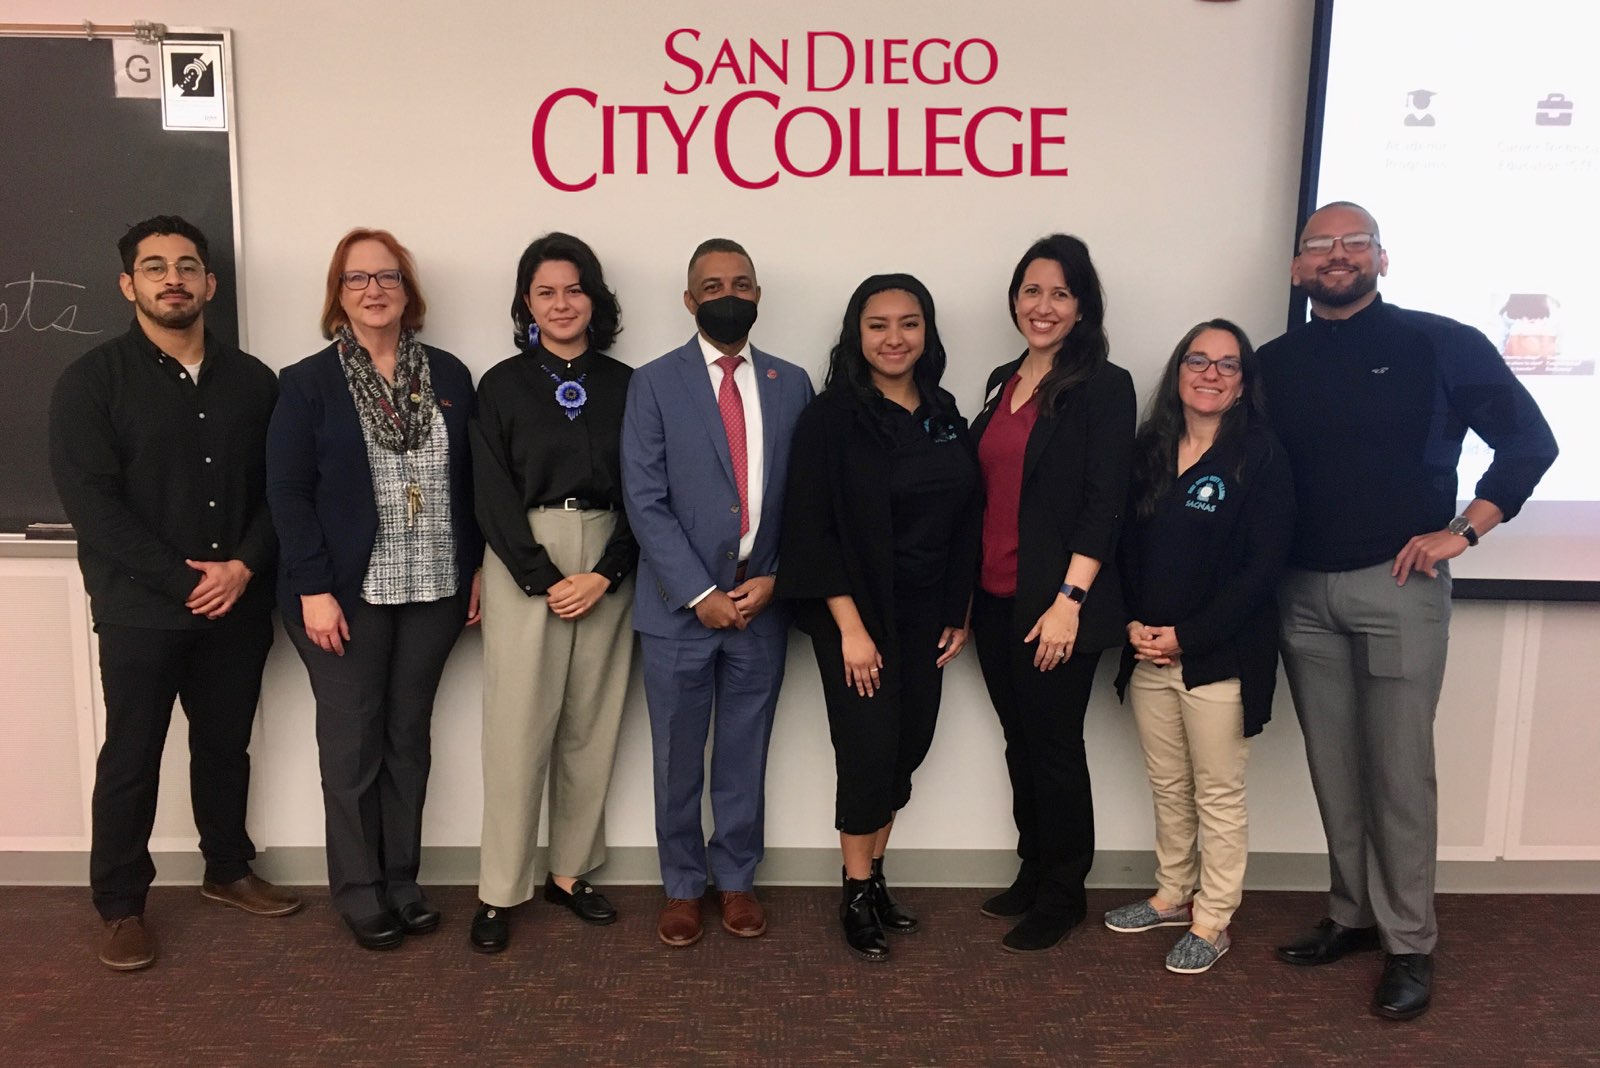 At San Diego City College 3 scholars present at San Diego City College. There are a group of 8 people in the picture. They are all in dress clothes. The President of City College is waring a mask and The Dean of Sciences at City is also present.